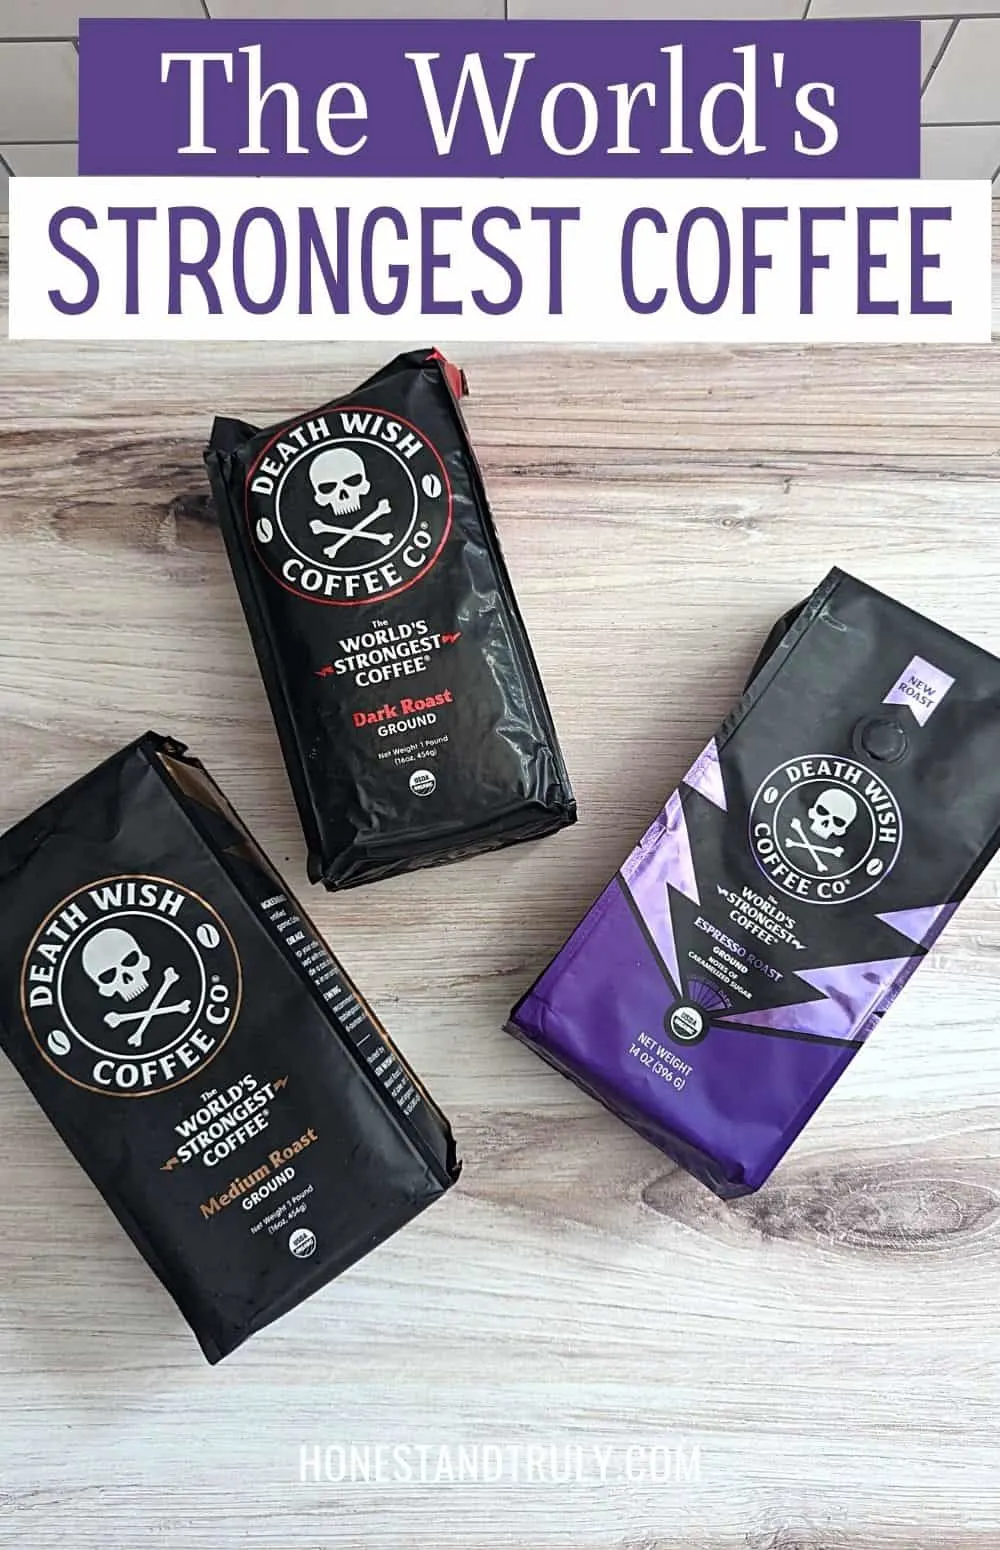 Death Wish Coffee Review: A Perfect STRONG and Smooth Coffee